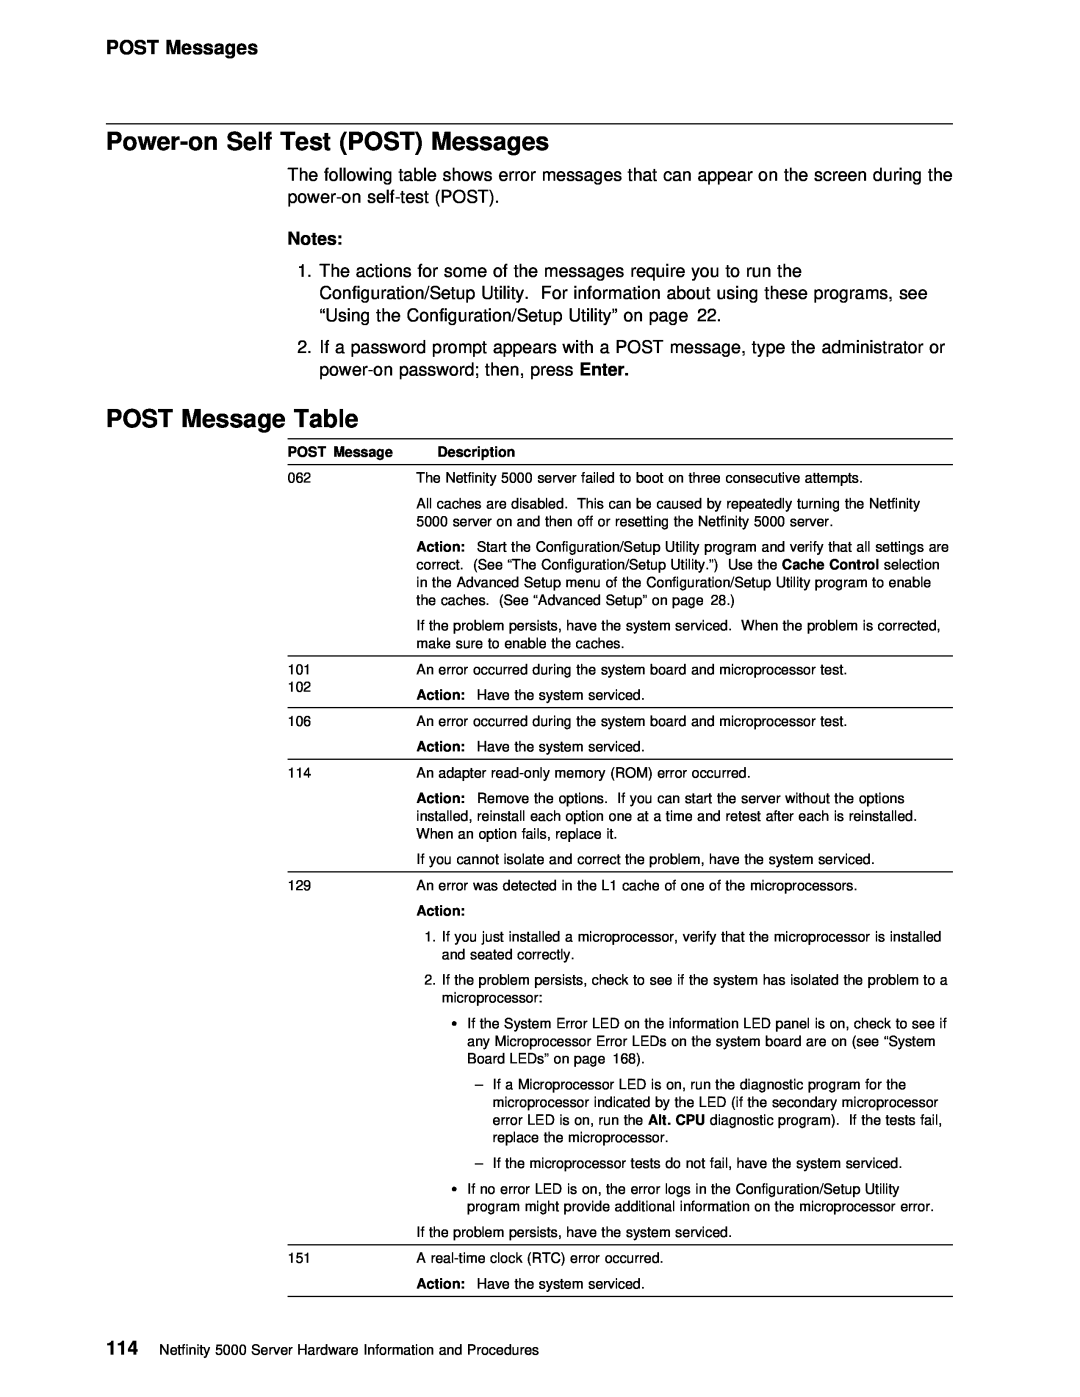 IBM 5000 manual Power-on Self Test POST Messages, POST Message Table 